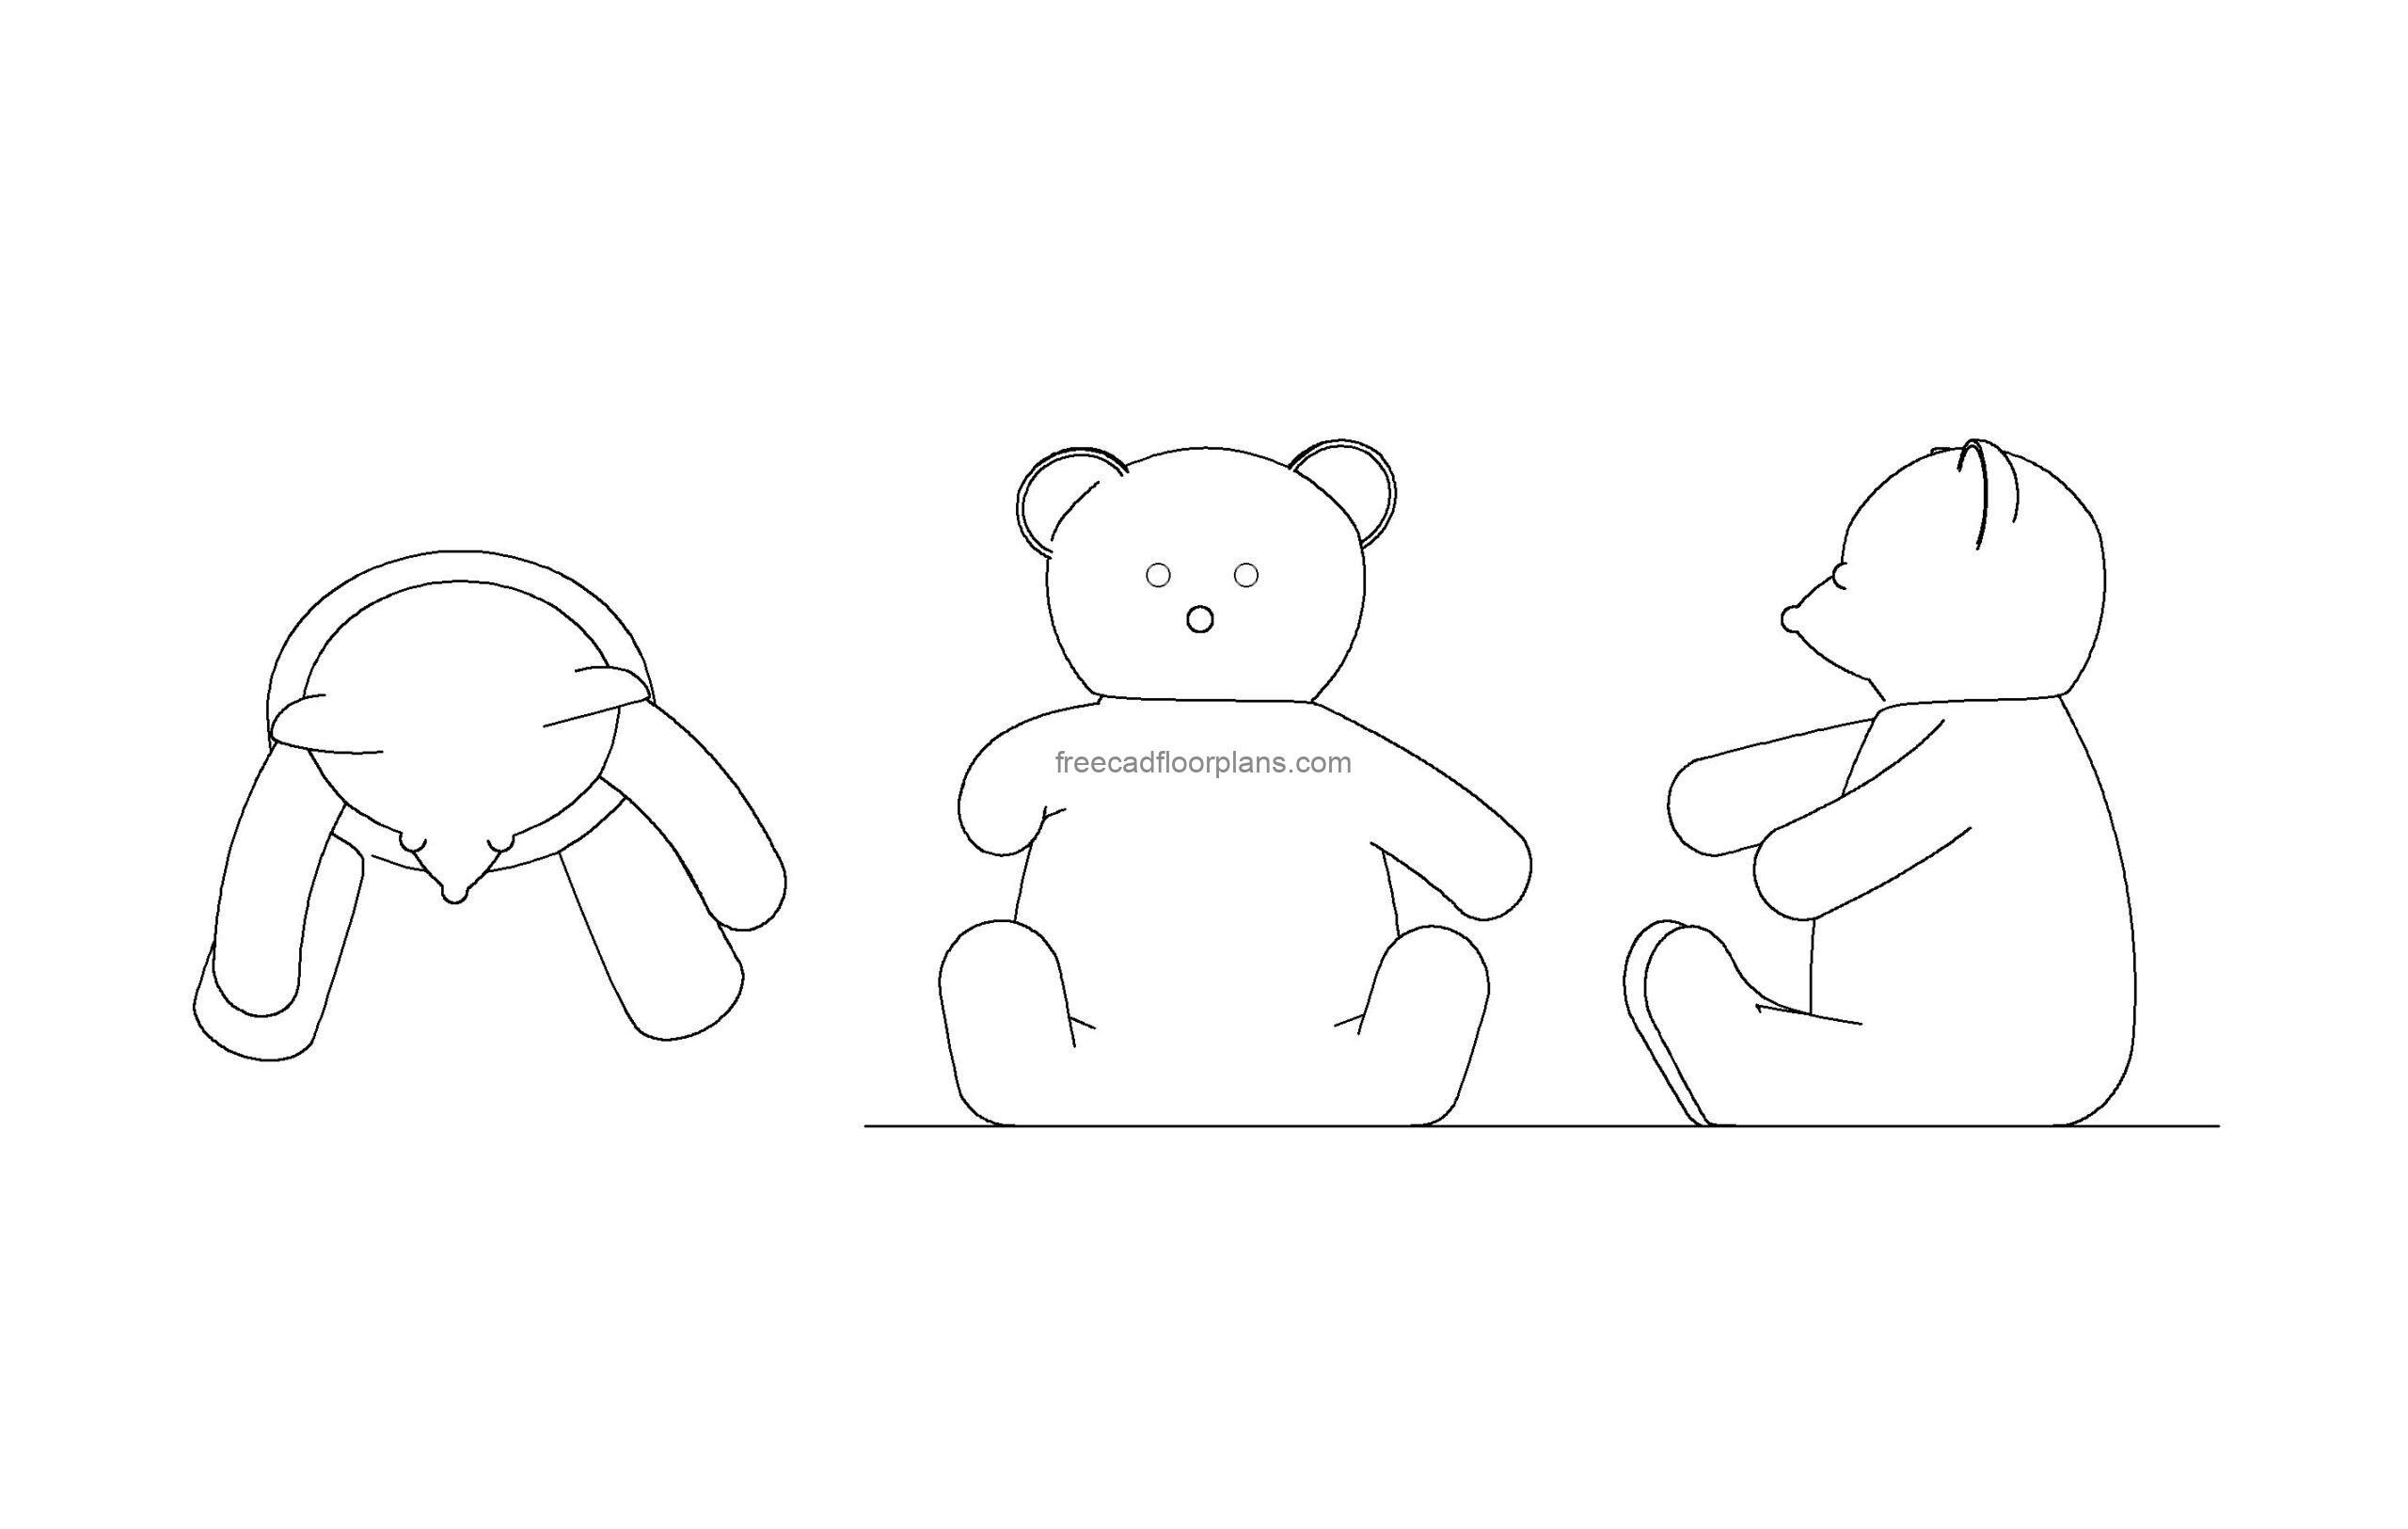 teddy bear autocad drawing plan and elevations 2d views, dwg file for free download